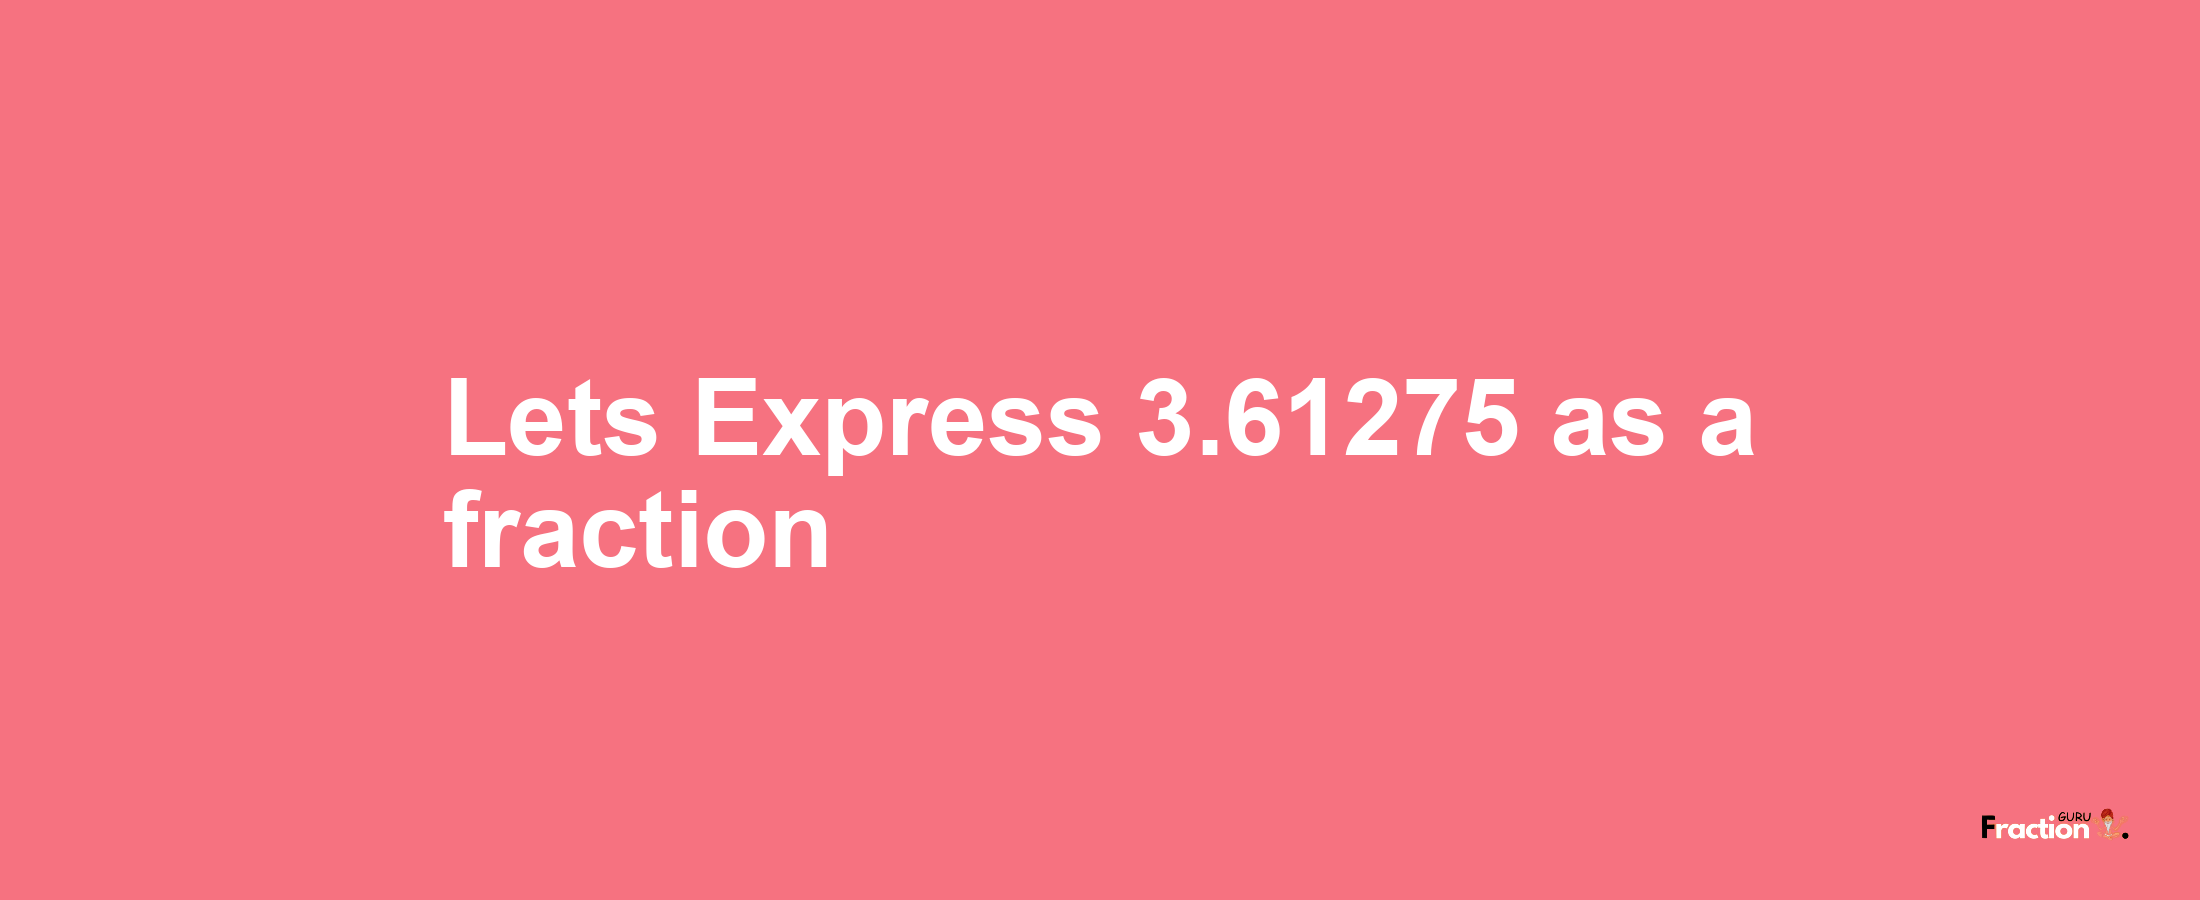 Lets Express 3.61275 as afraction